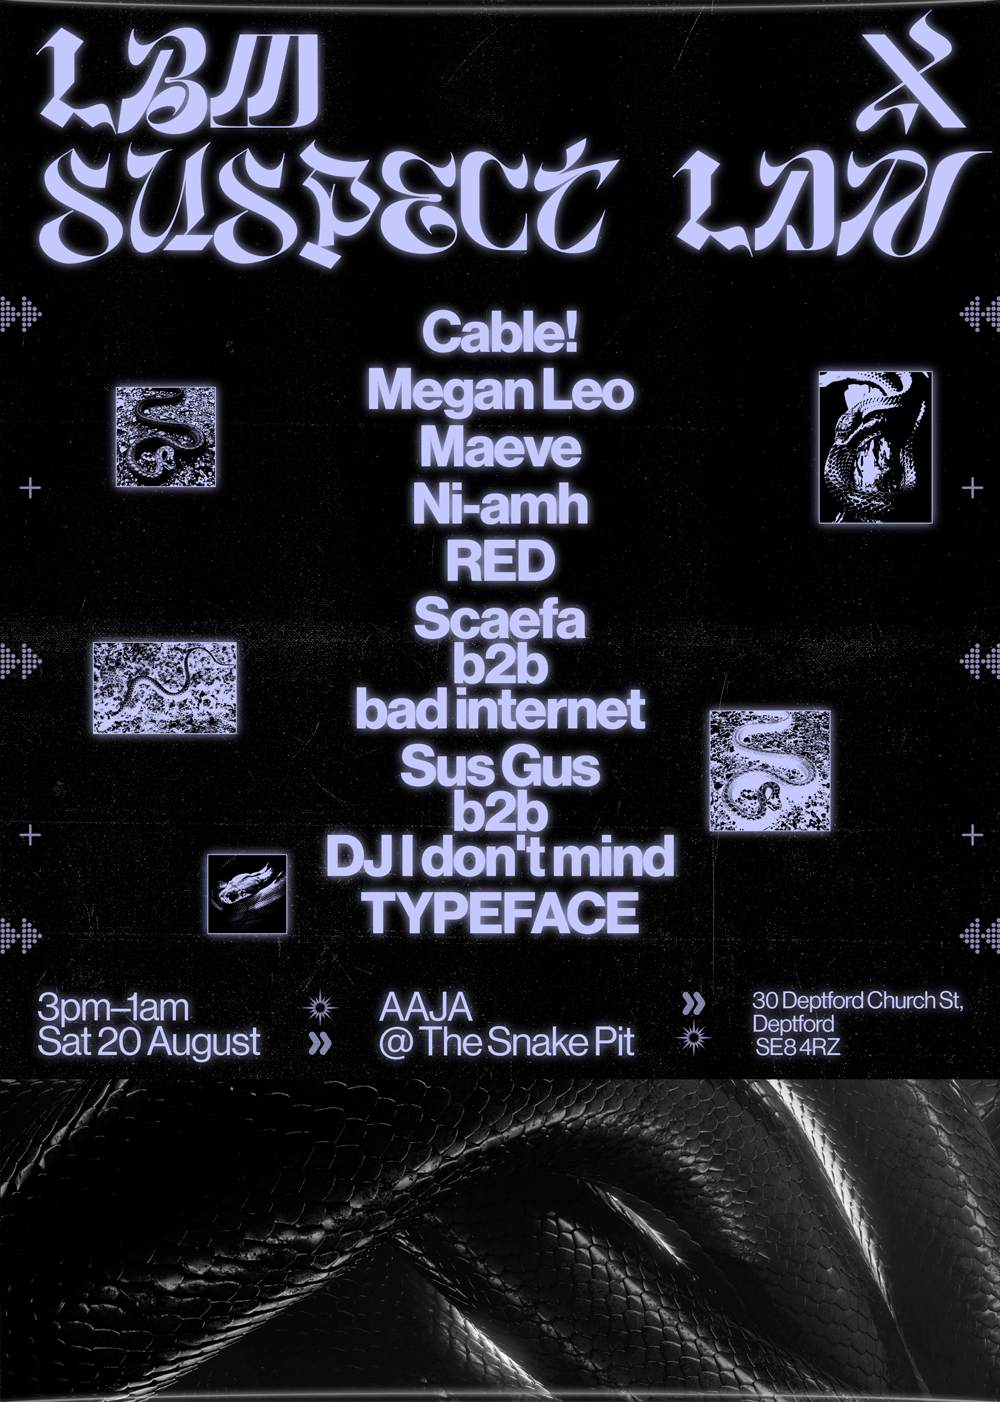 LBM X Suspect LDN Day into Night Party: Megan Leo, Maeve, RED, Cable!, Scaefa, Ni-am - フライヤー表